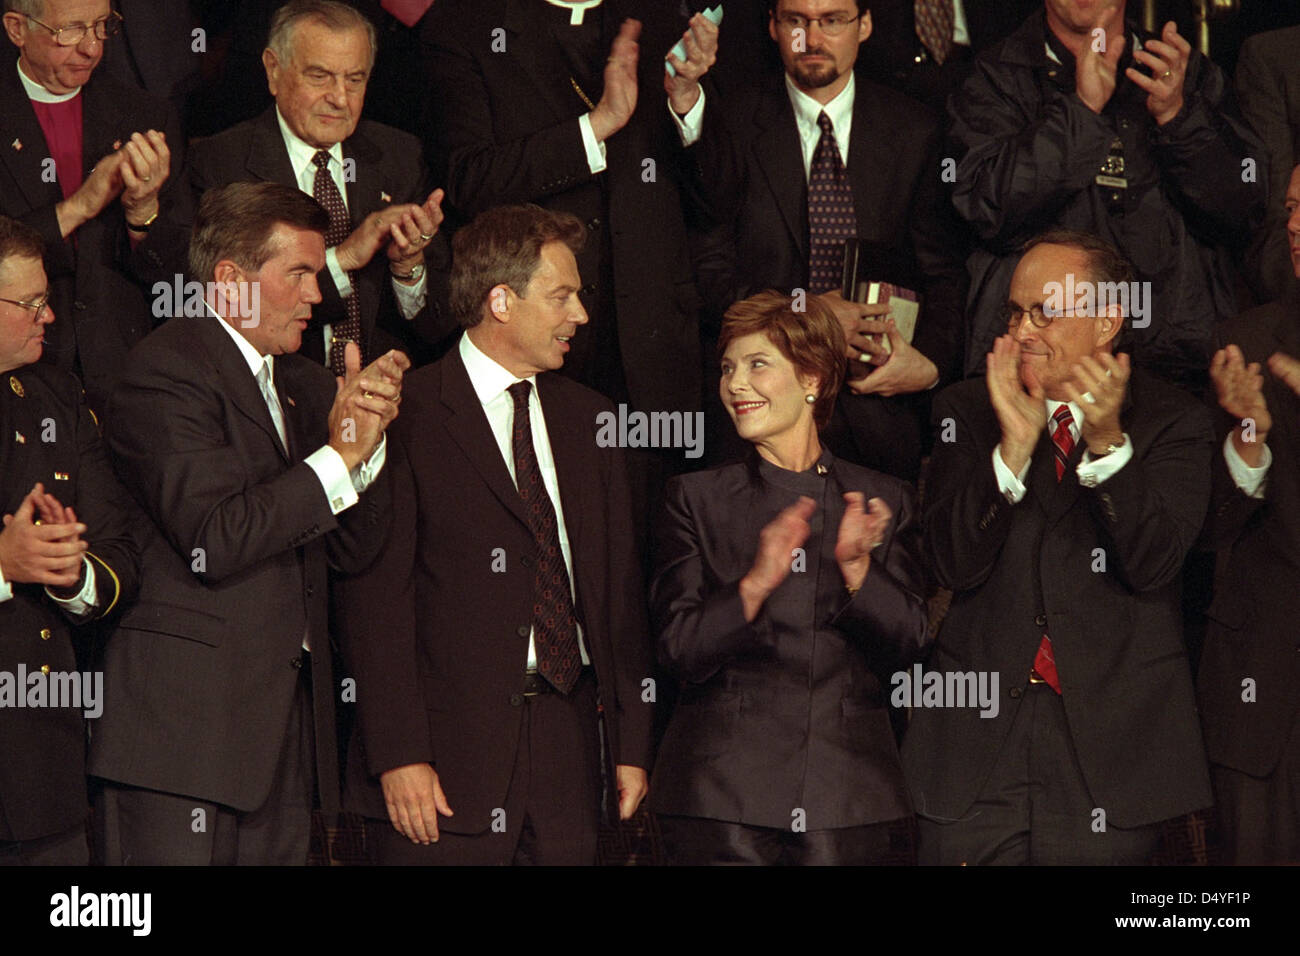 British Prime Minister Tony Blair receives applause Thursday, Sept. 20, 2001, as he stands with Mrs. Laura Bush during a televised national address to the joint session of Congress. Also pictured are Pennsylvania Governor Tom Ridge, left, and New York Mayor Rudolph Giuliani. Photo by Paul Morse, Courtesy of the George W. Bush Presidential Library Stock Photo